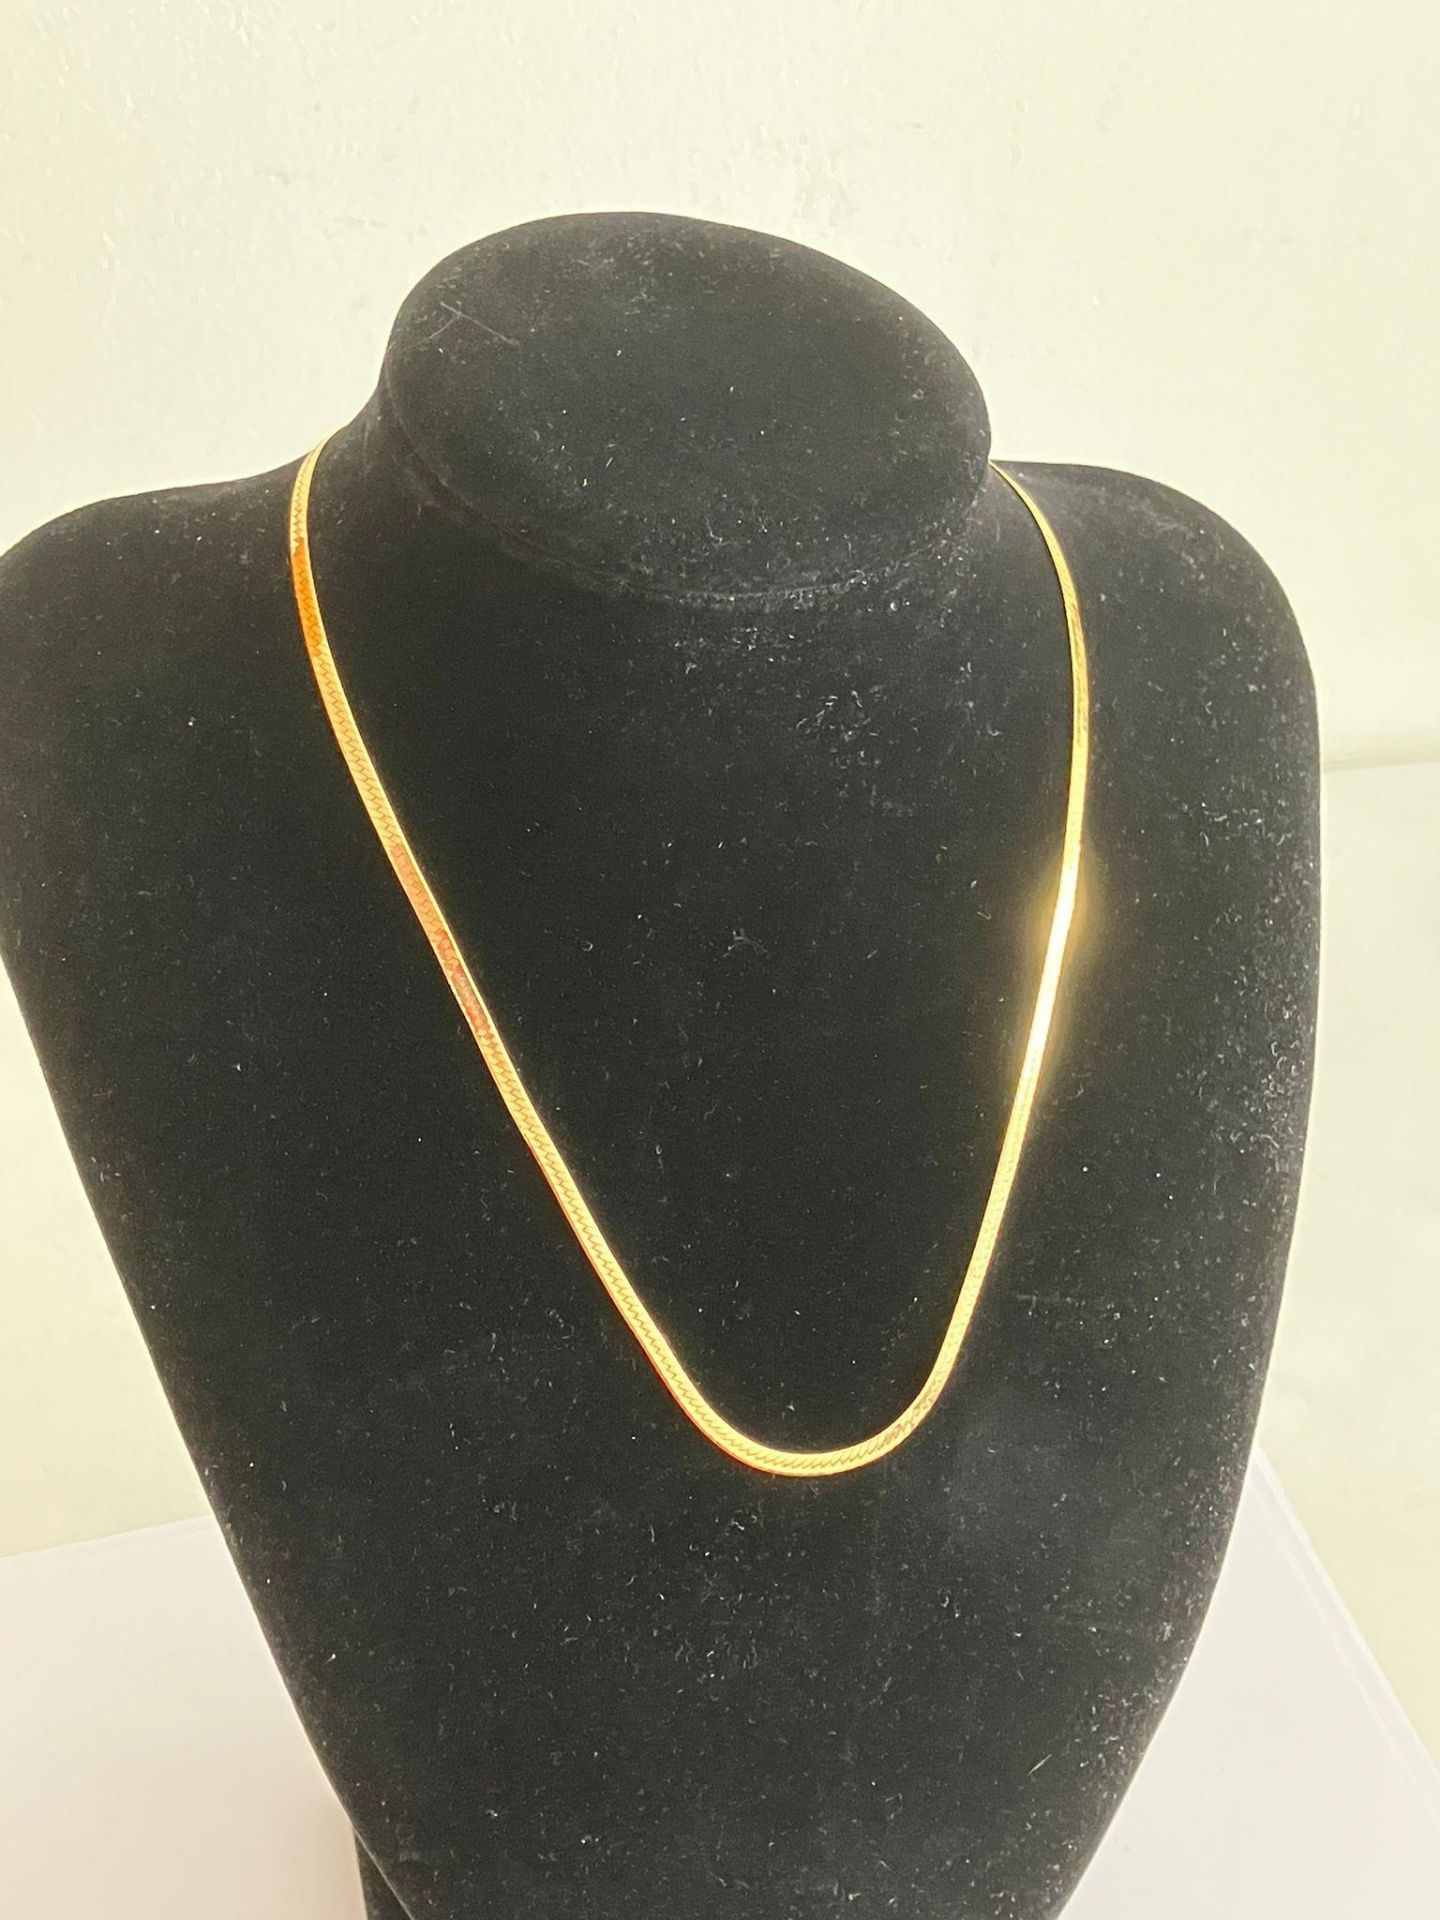 9 carat GOLD CLASSIC HERRINGBONE FLAT NECKLACE with chased pattern. Full UK hallmark. 3.66 grams.